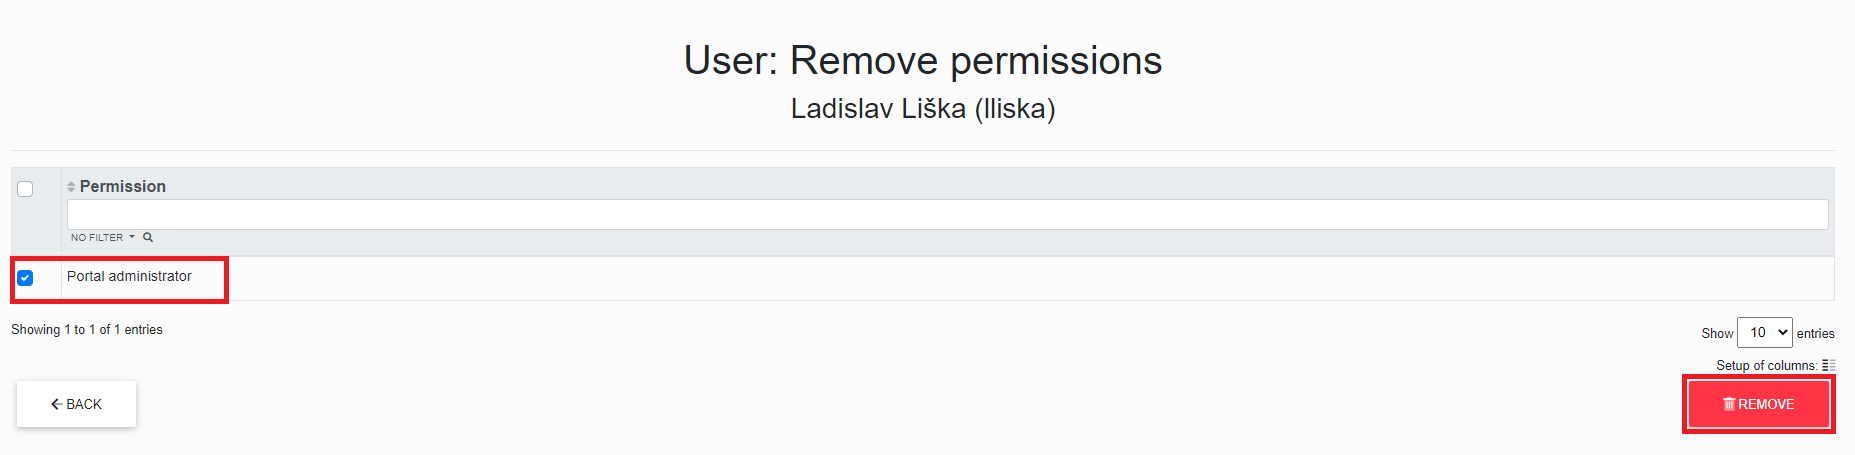 permissions remove 1.png